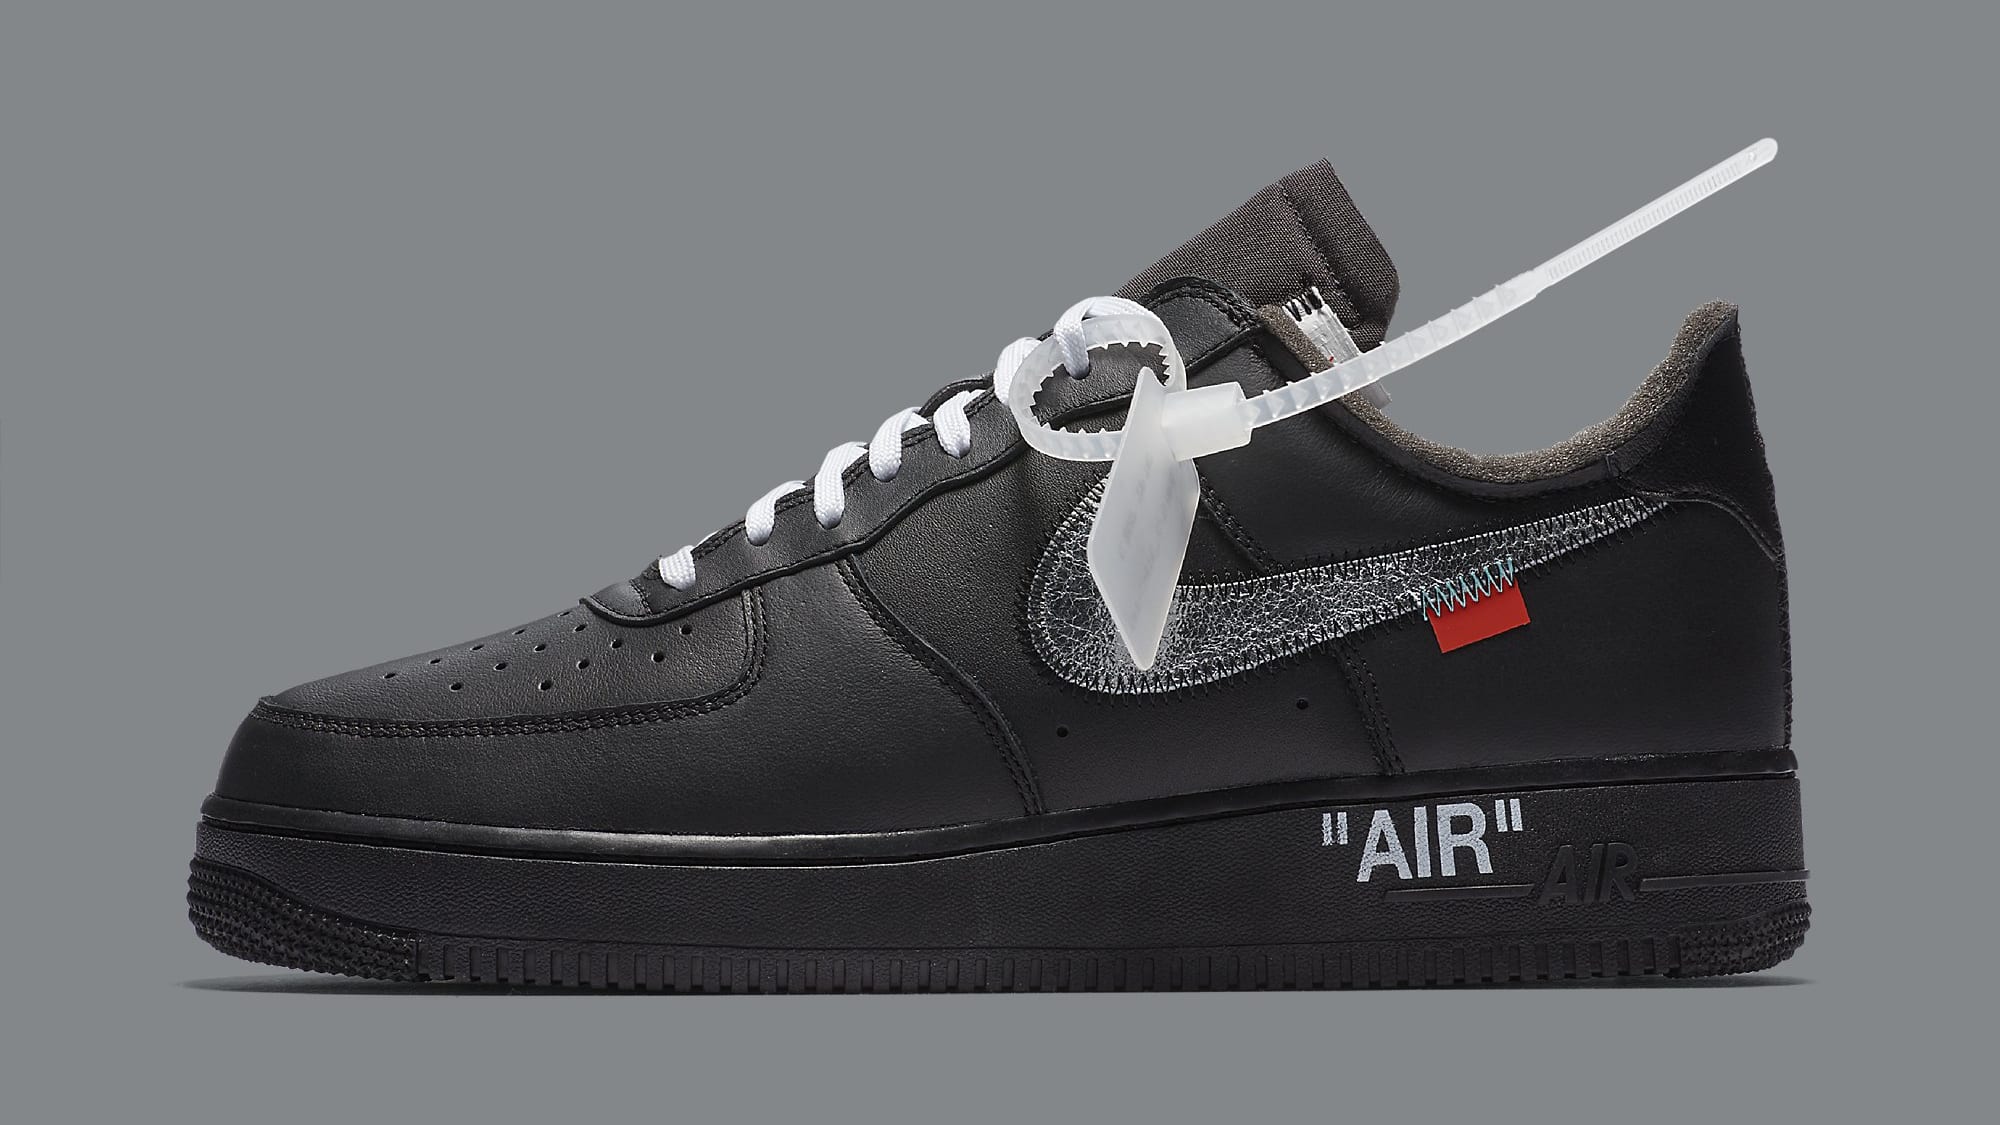 The Off-White x Nike Air Force 1 Low Grey Is Rumoured to Release